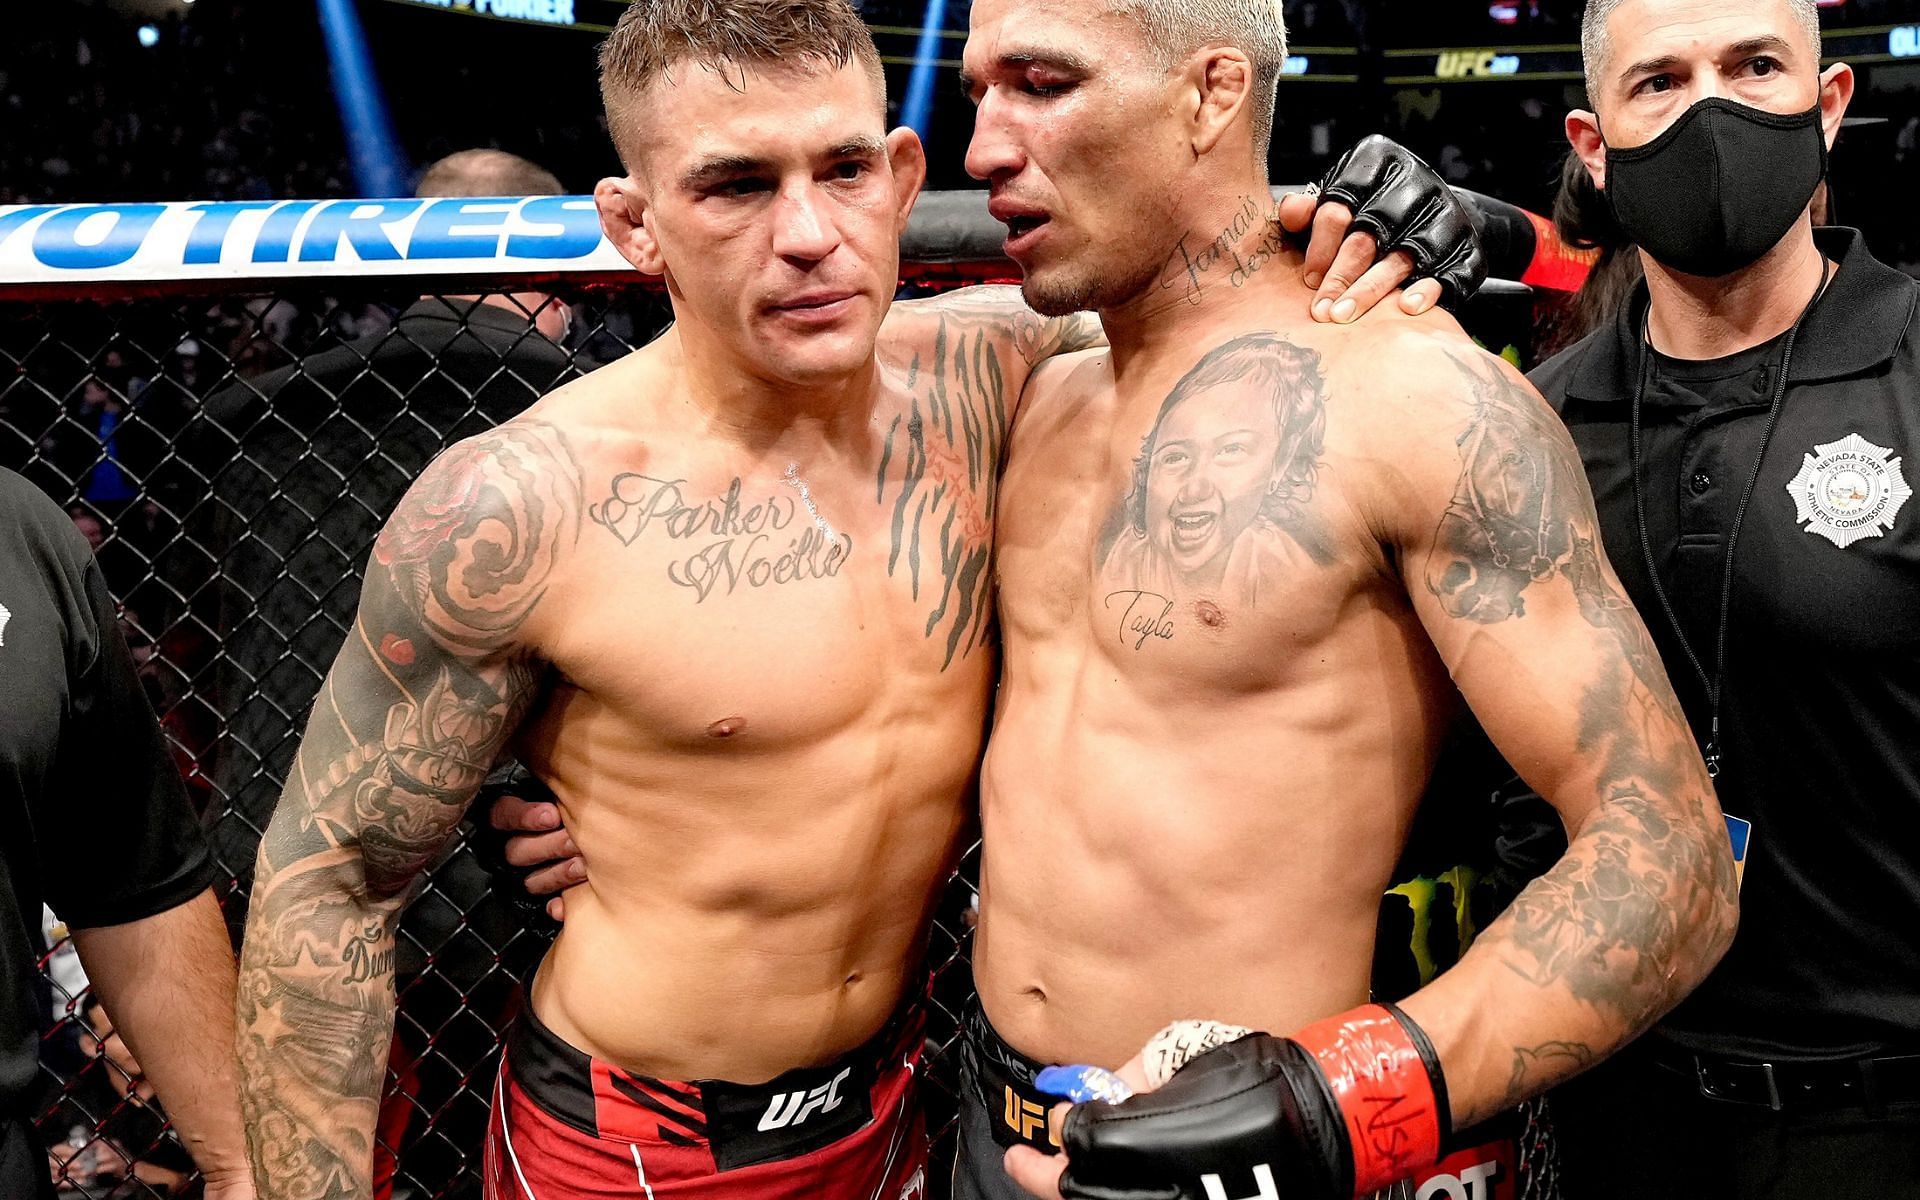 Dustin Poirier and Charles Oliveira after their fight at UFC 269 [Credits: @ufc via Twitter]